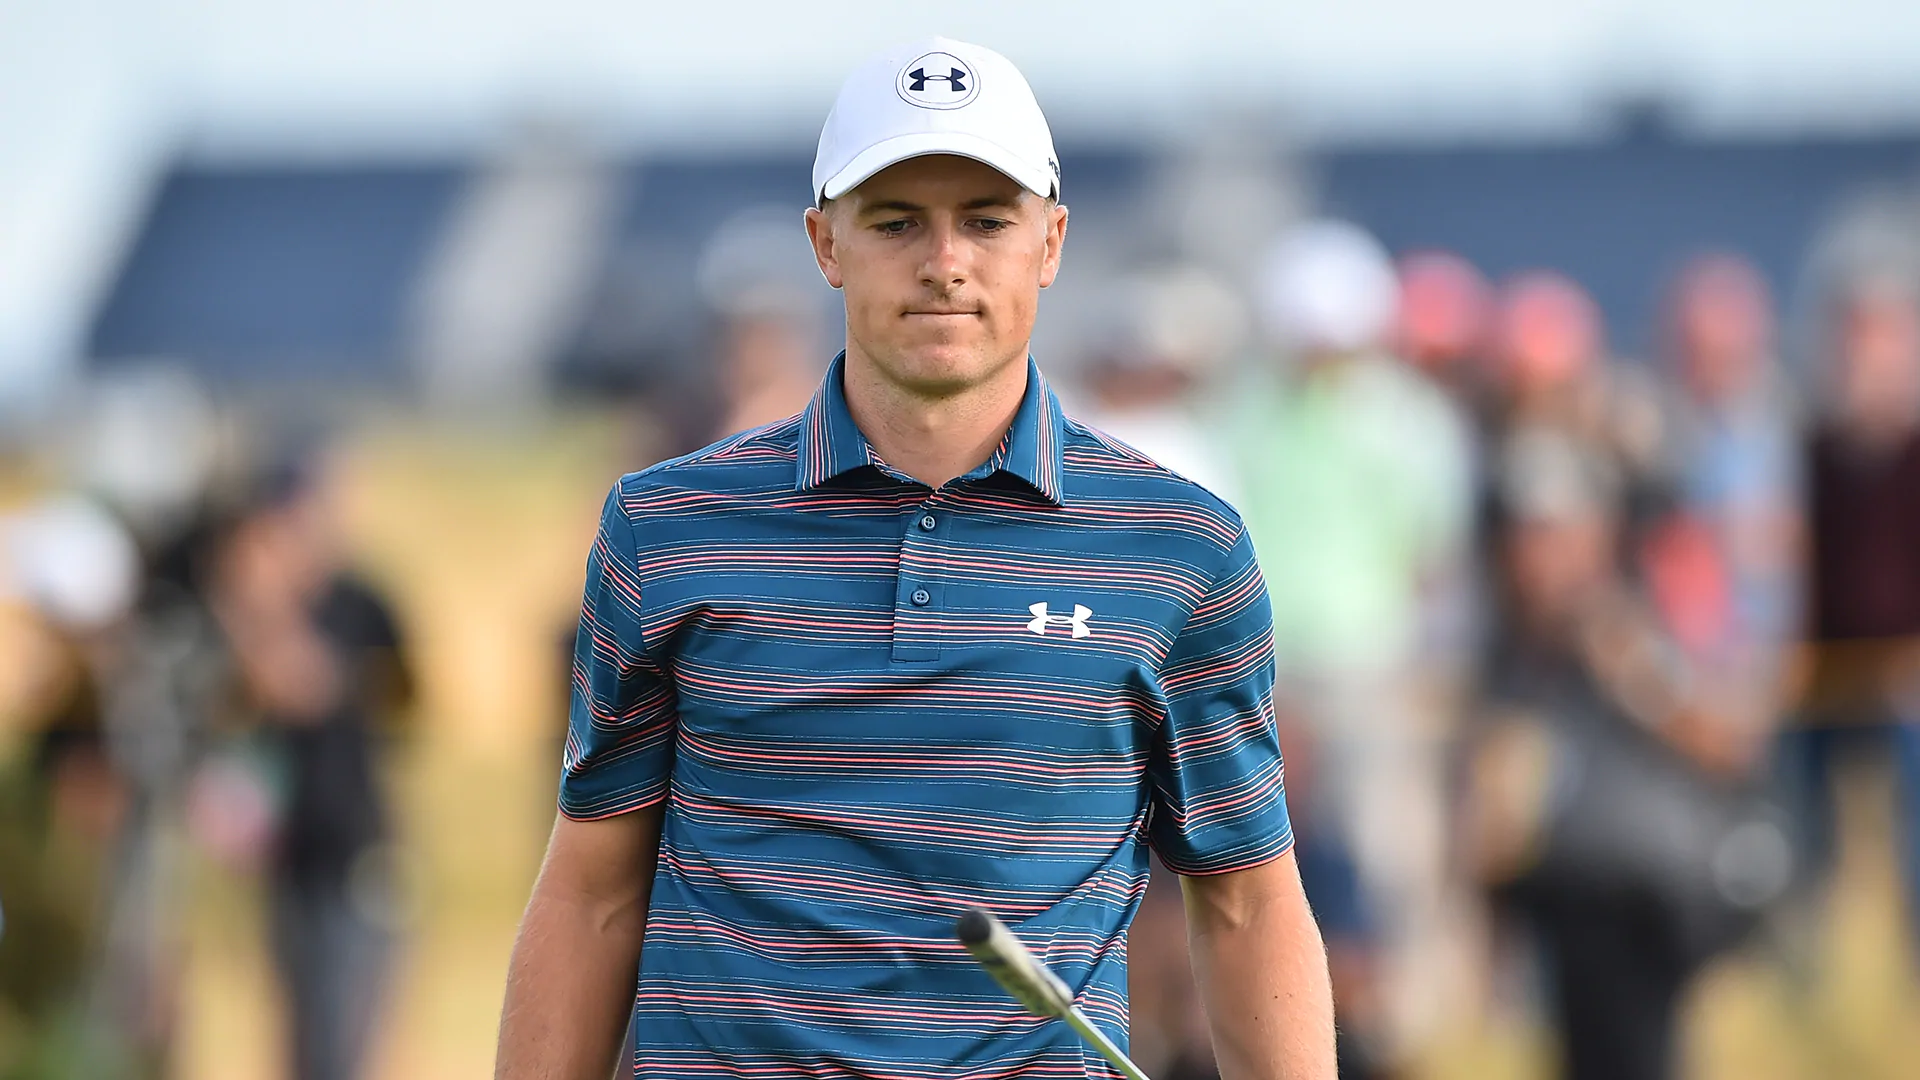 Spieth shrugs off his worst final round in a major